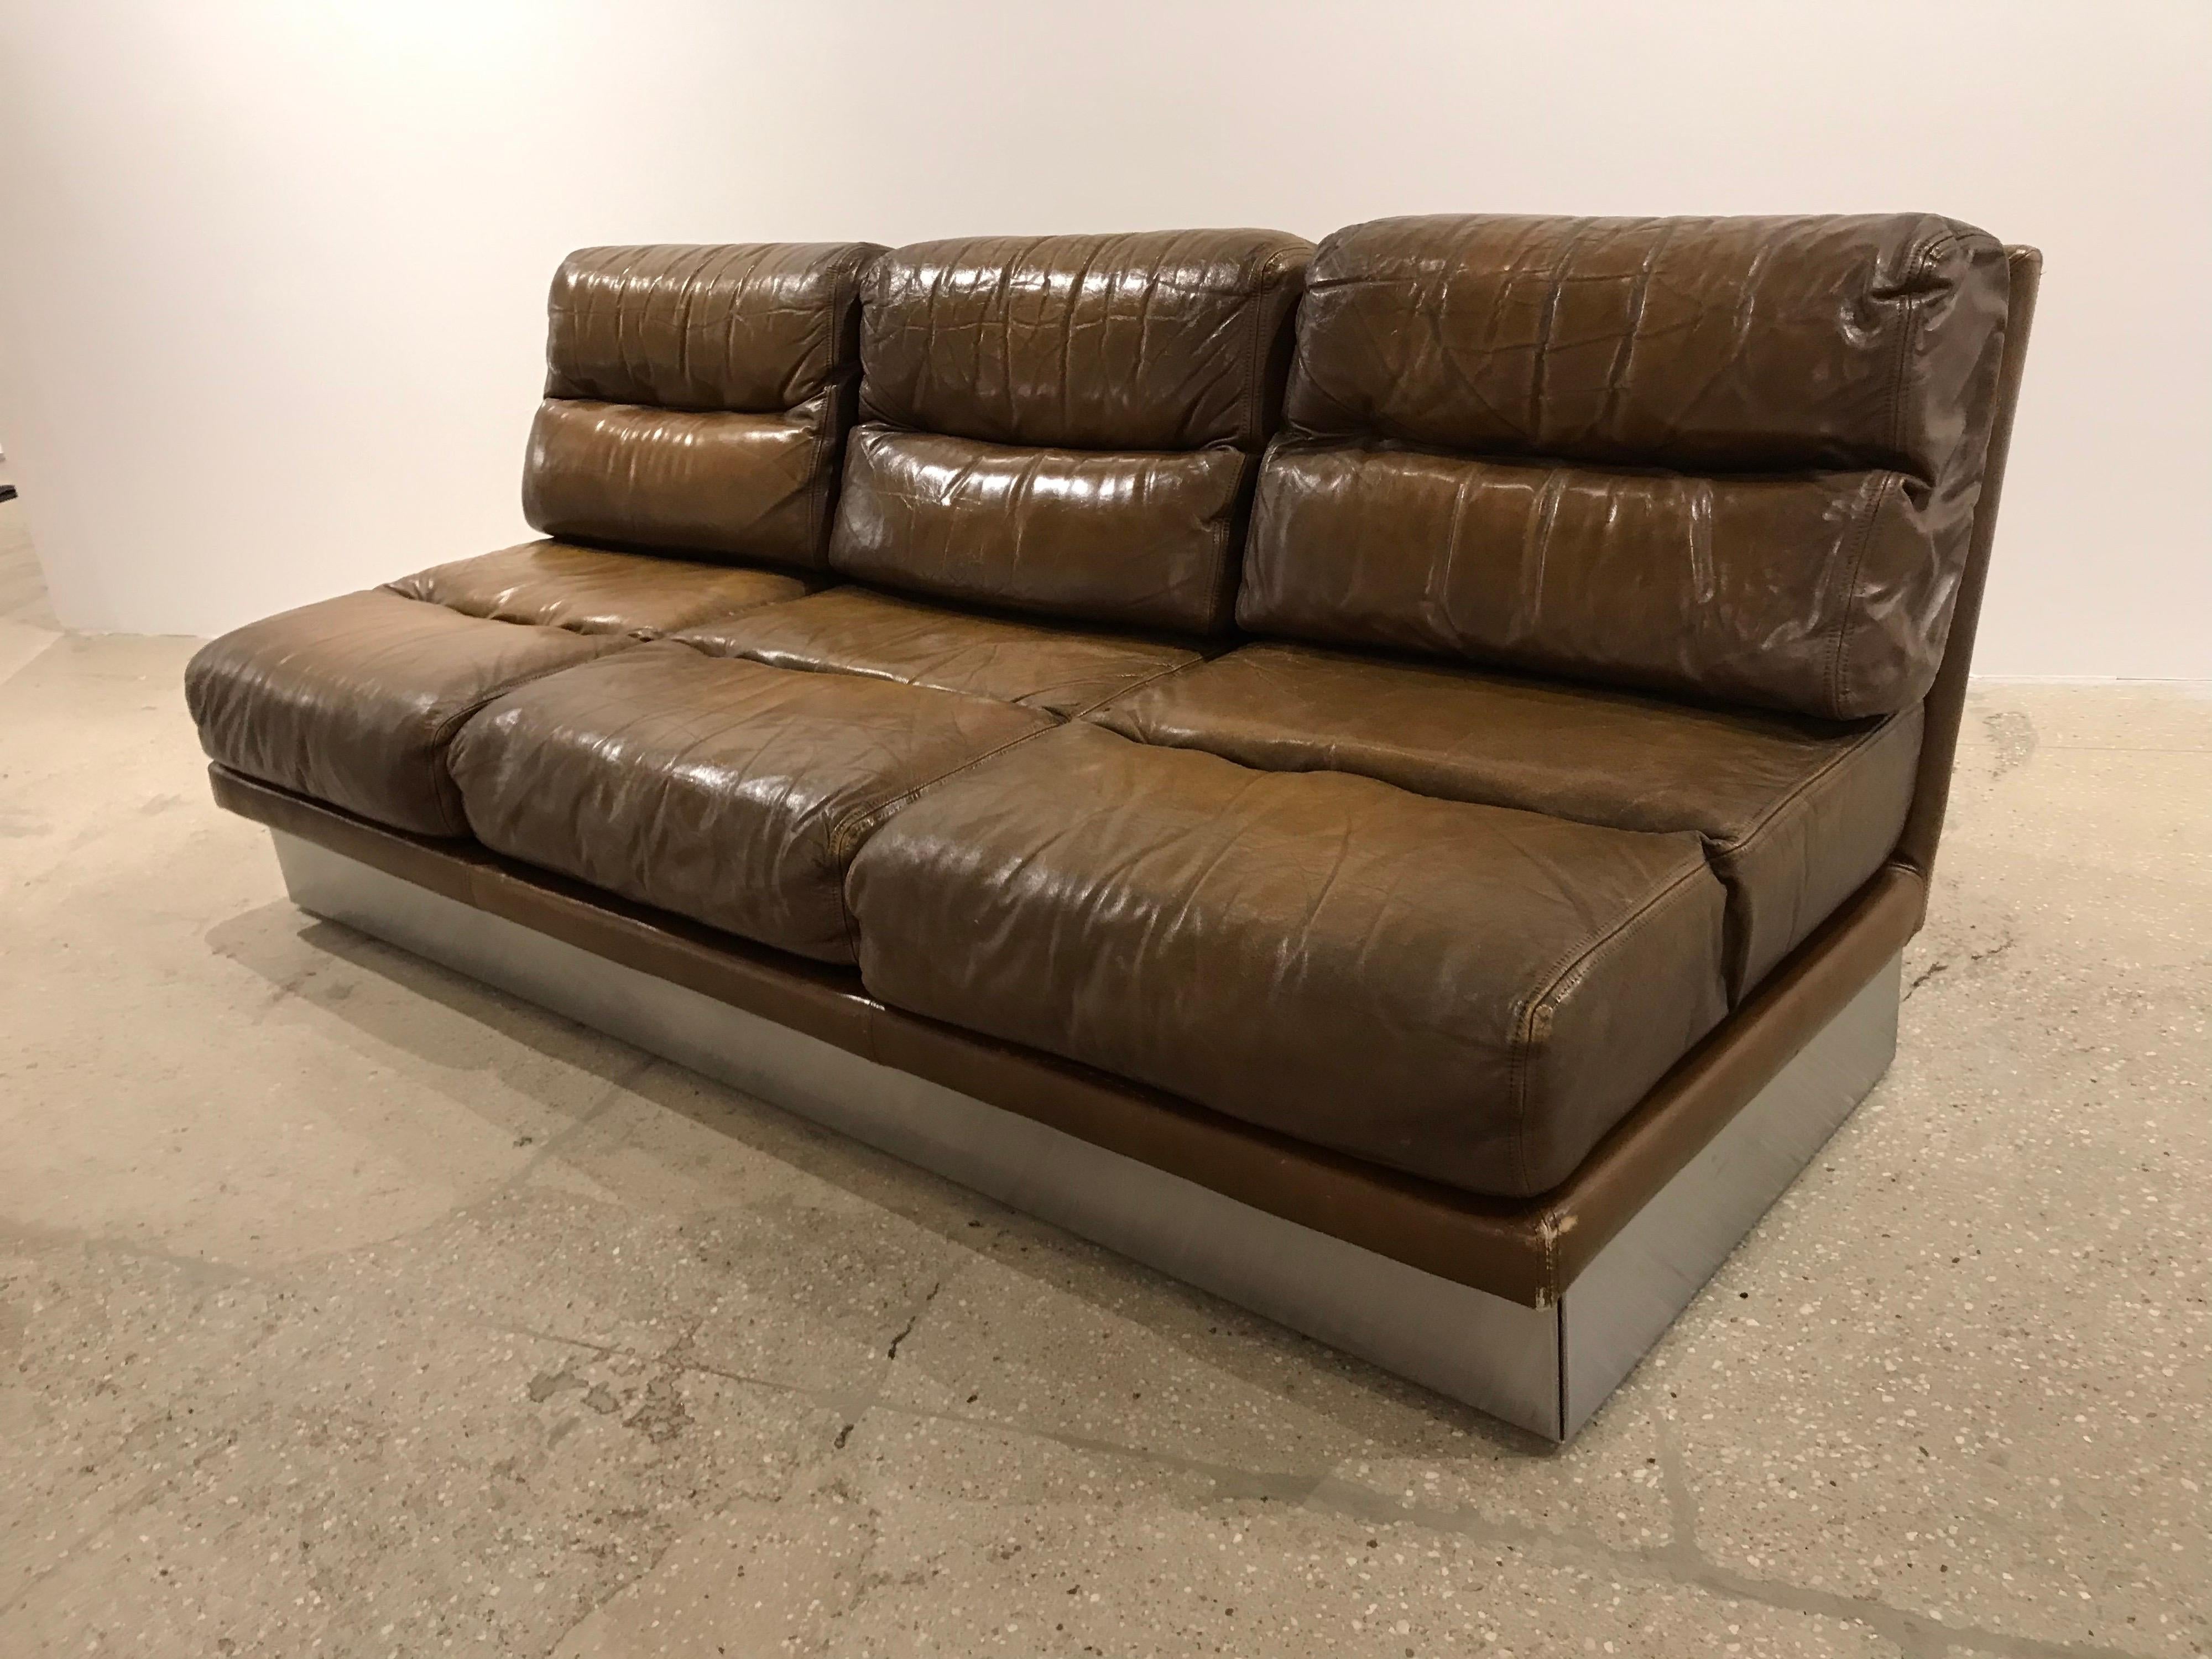 A three-seat leather and stainless steel French sofa by Jacques Charpentier. A matching pair of lounge chairs available.